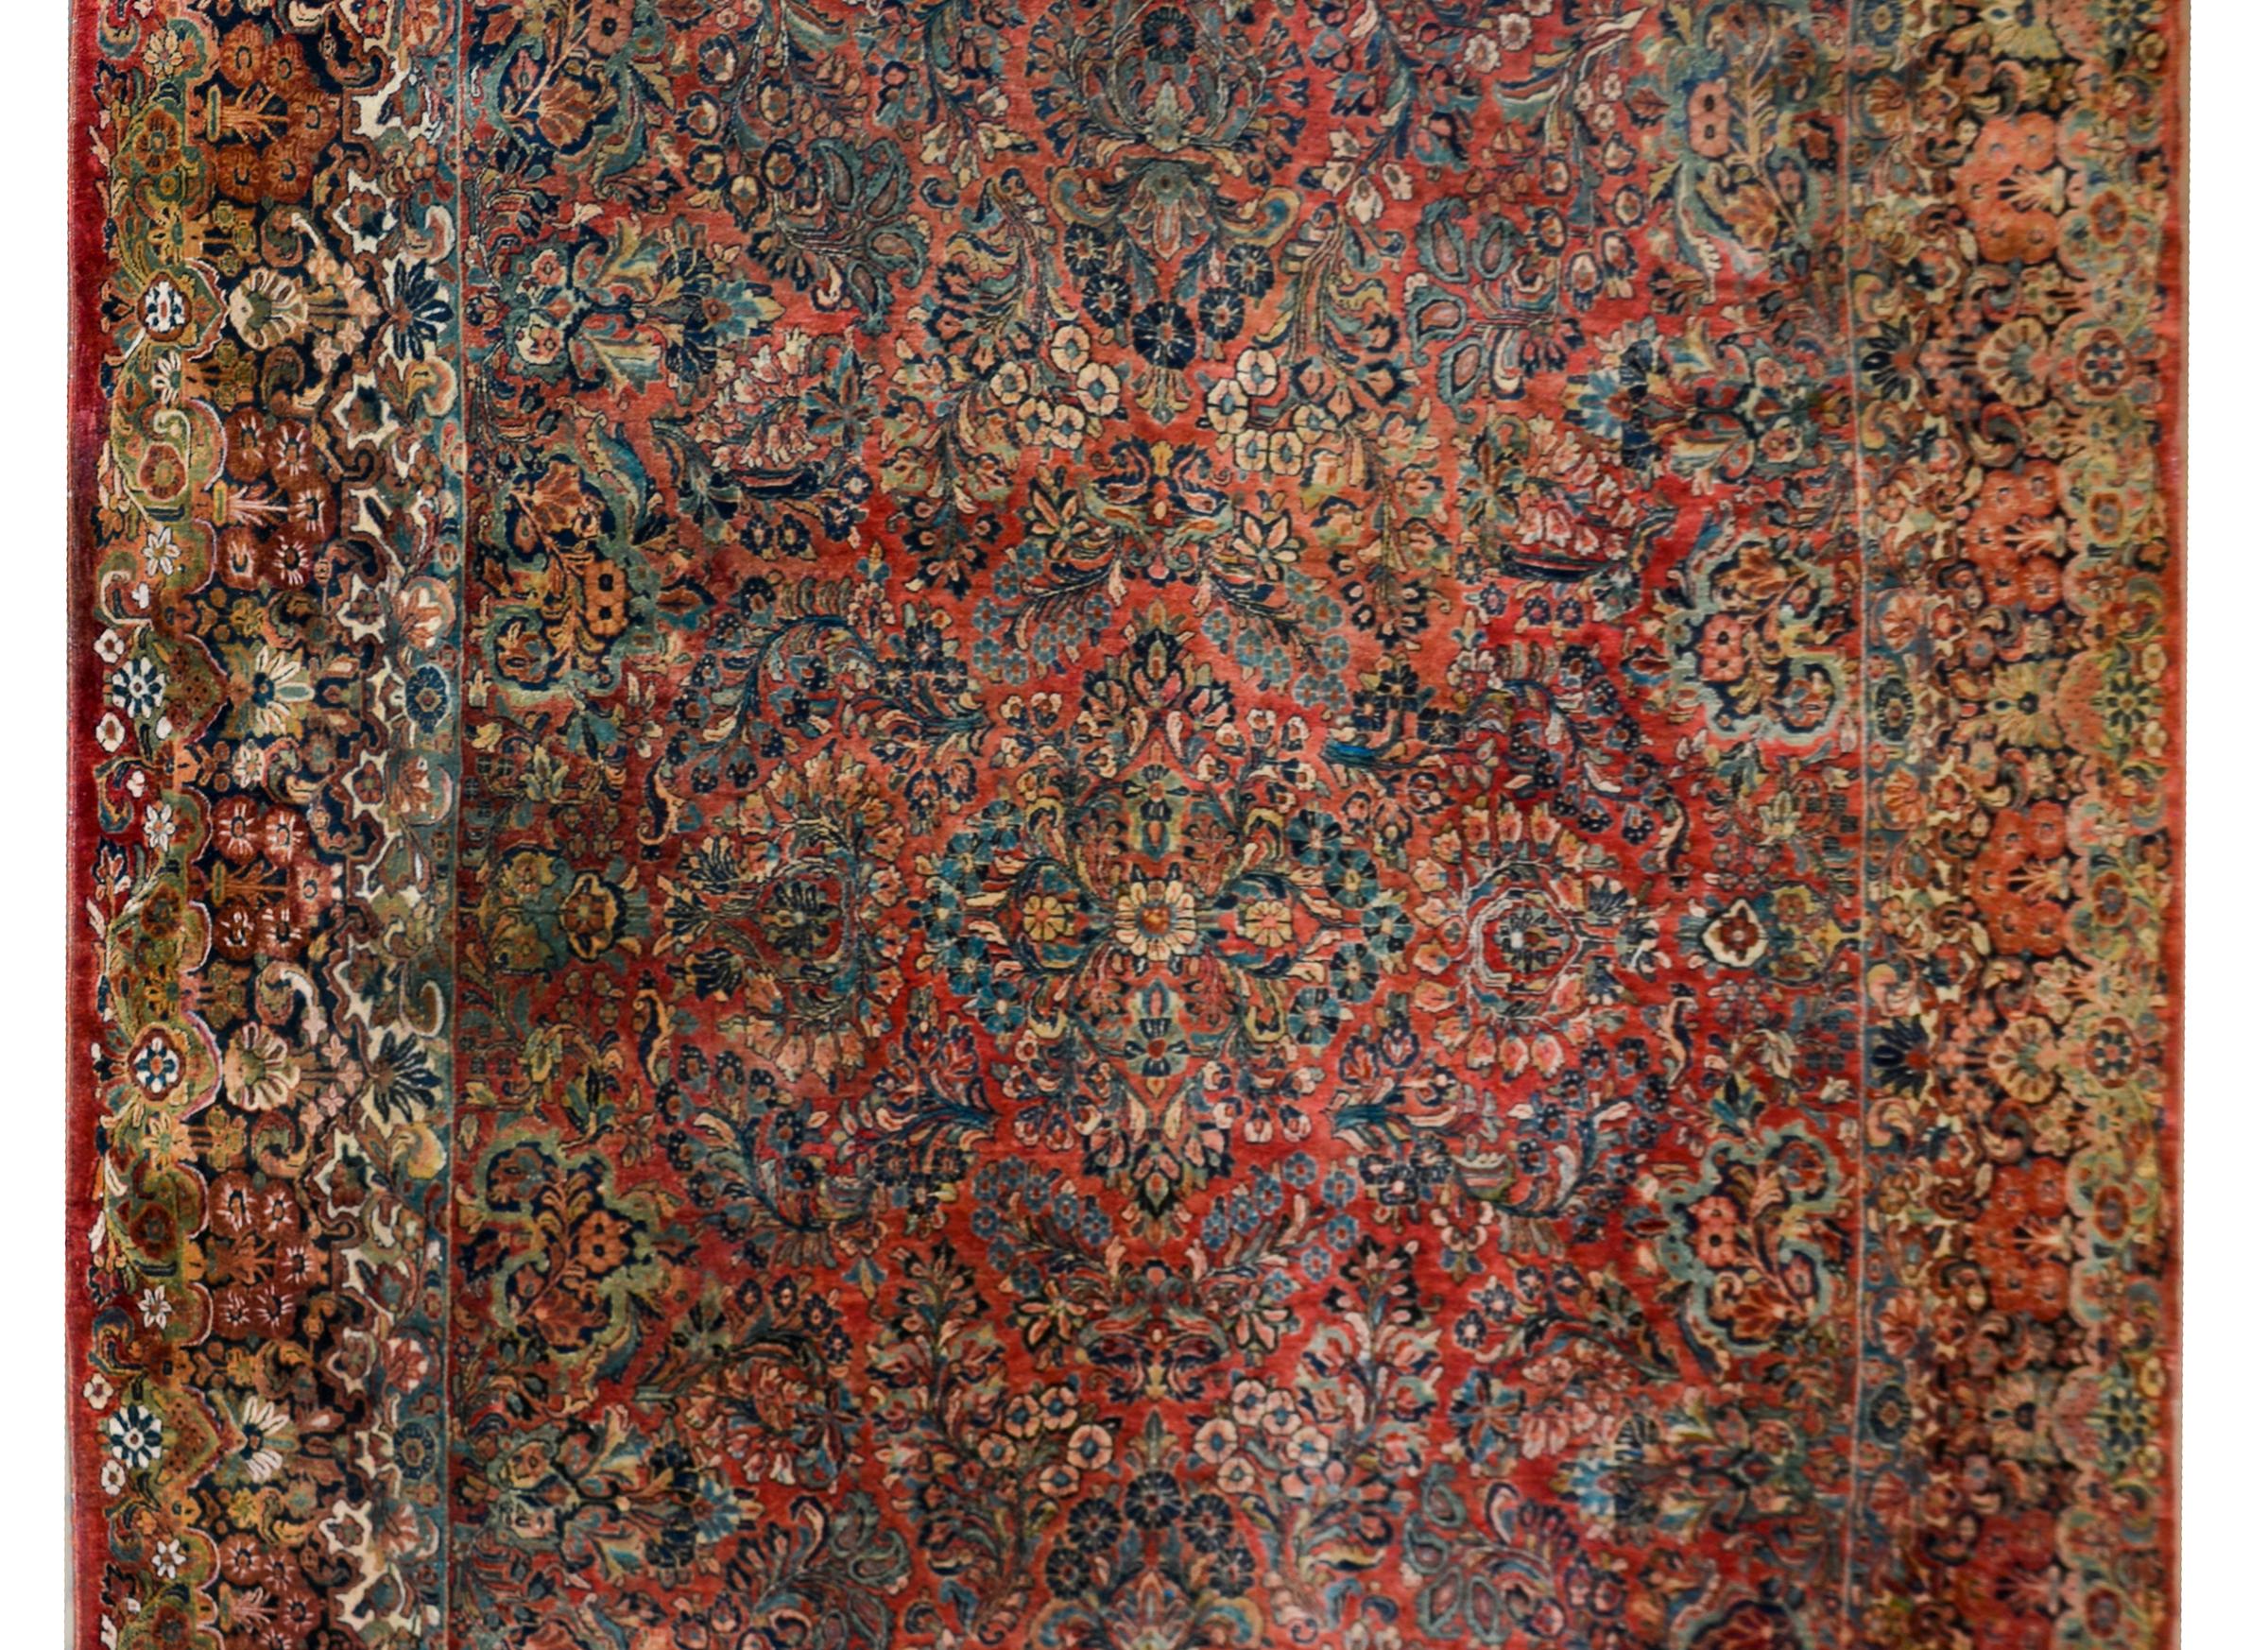 An incredible early 20th century Persian Sarouk rug with an incredible all-over floral cluster pattern woven in rich and dark colors including reds, creams, pinks, and light and dark indigos, all set against a dark cranberry background. The border